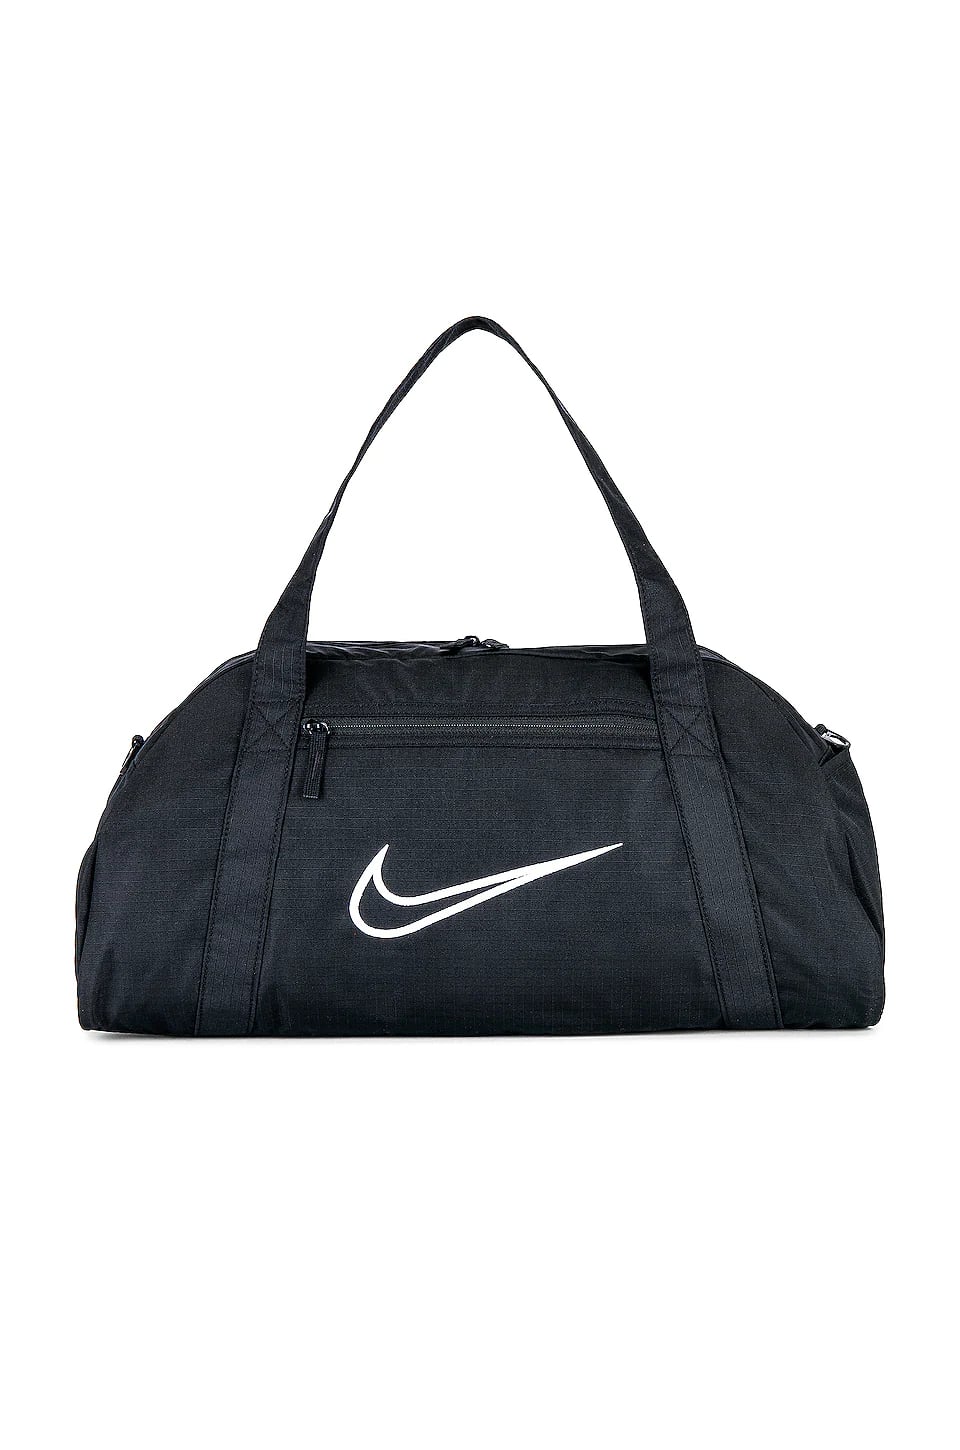 Best Gym Bags for Women - Most Stylish Gym Bags